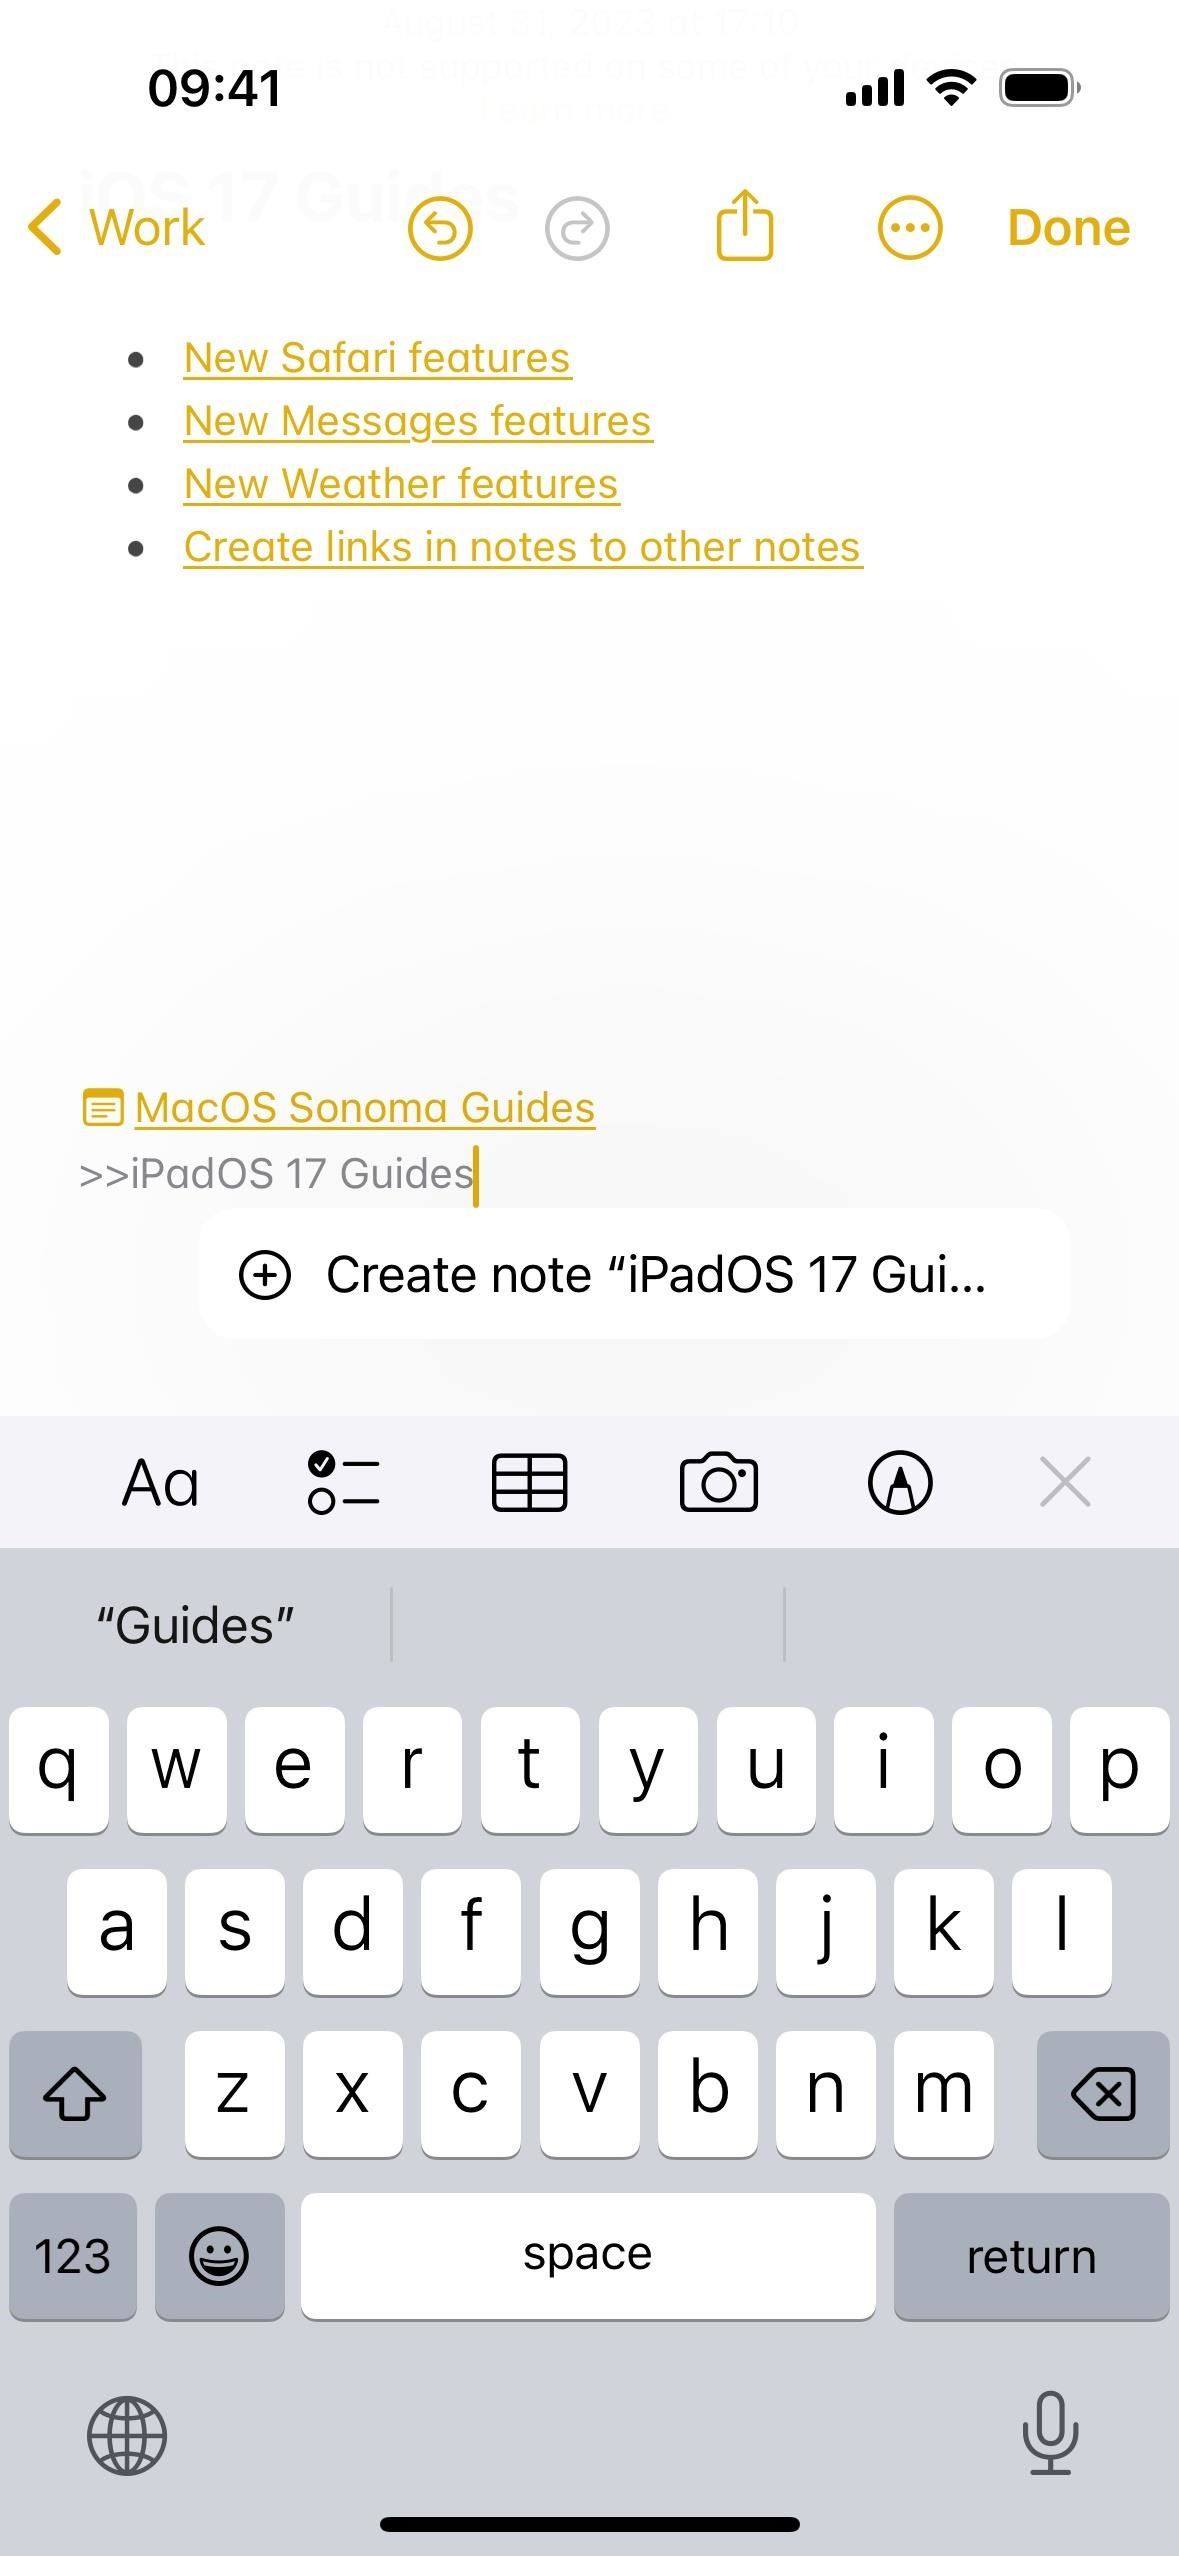 15+ New Apple Notes Features for iPhone and iPad That Will Finally Make It Your Go-To Notes App